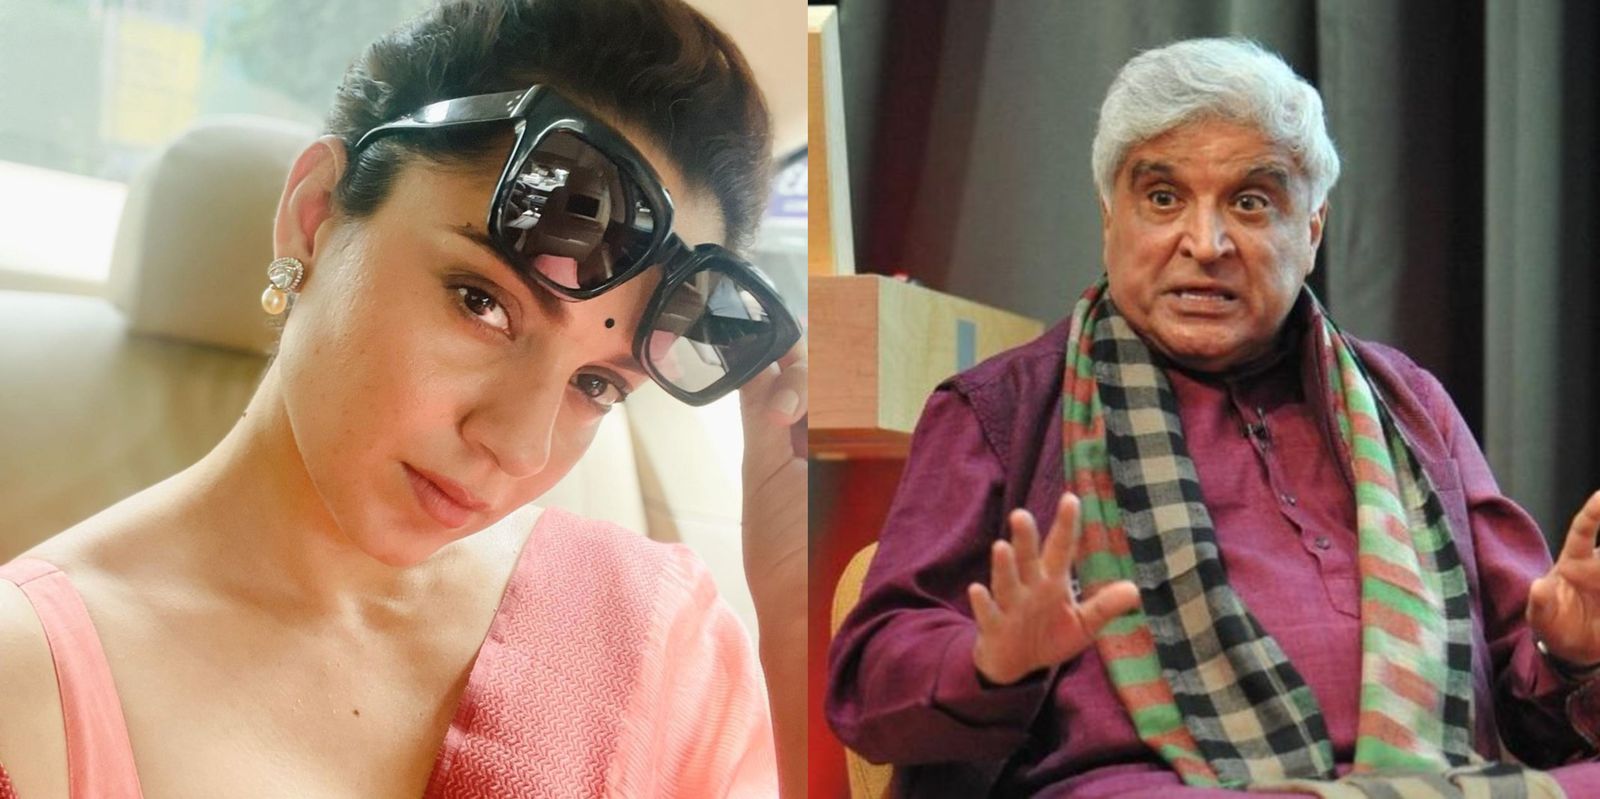 Kangana Ranaut says she has ‘lost faith’ as she appears before Mumbai magistrate court for Javed Akhtar defamation case